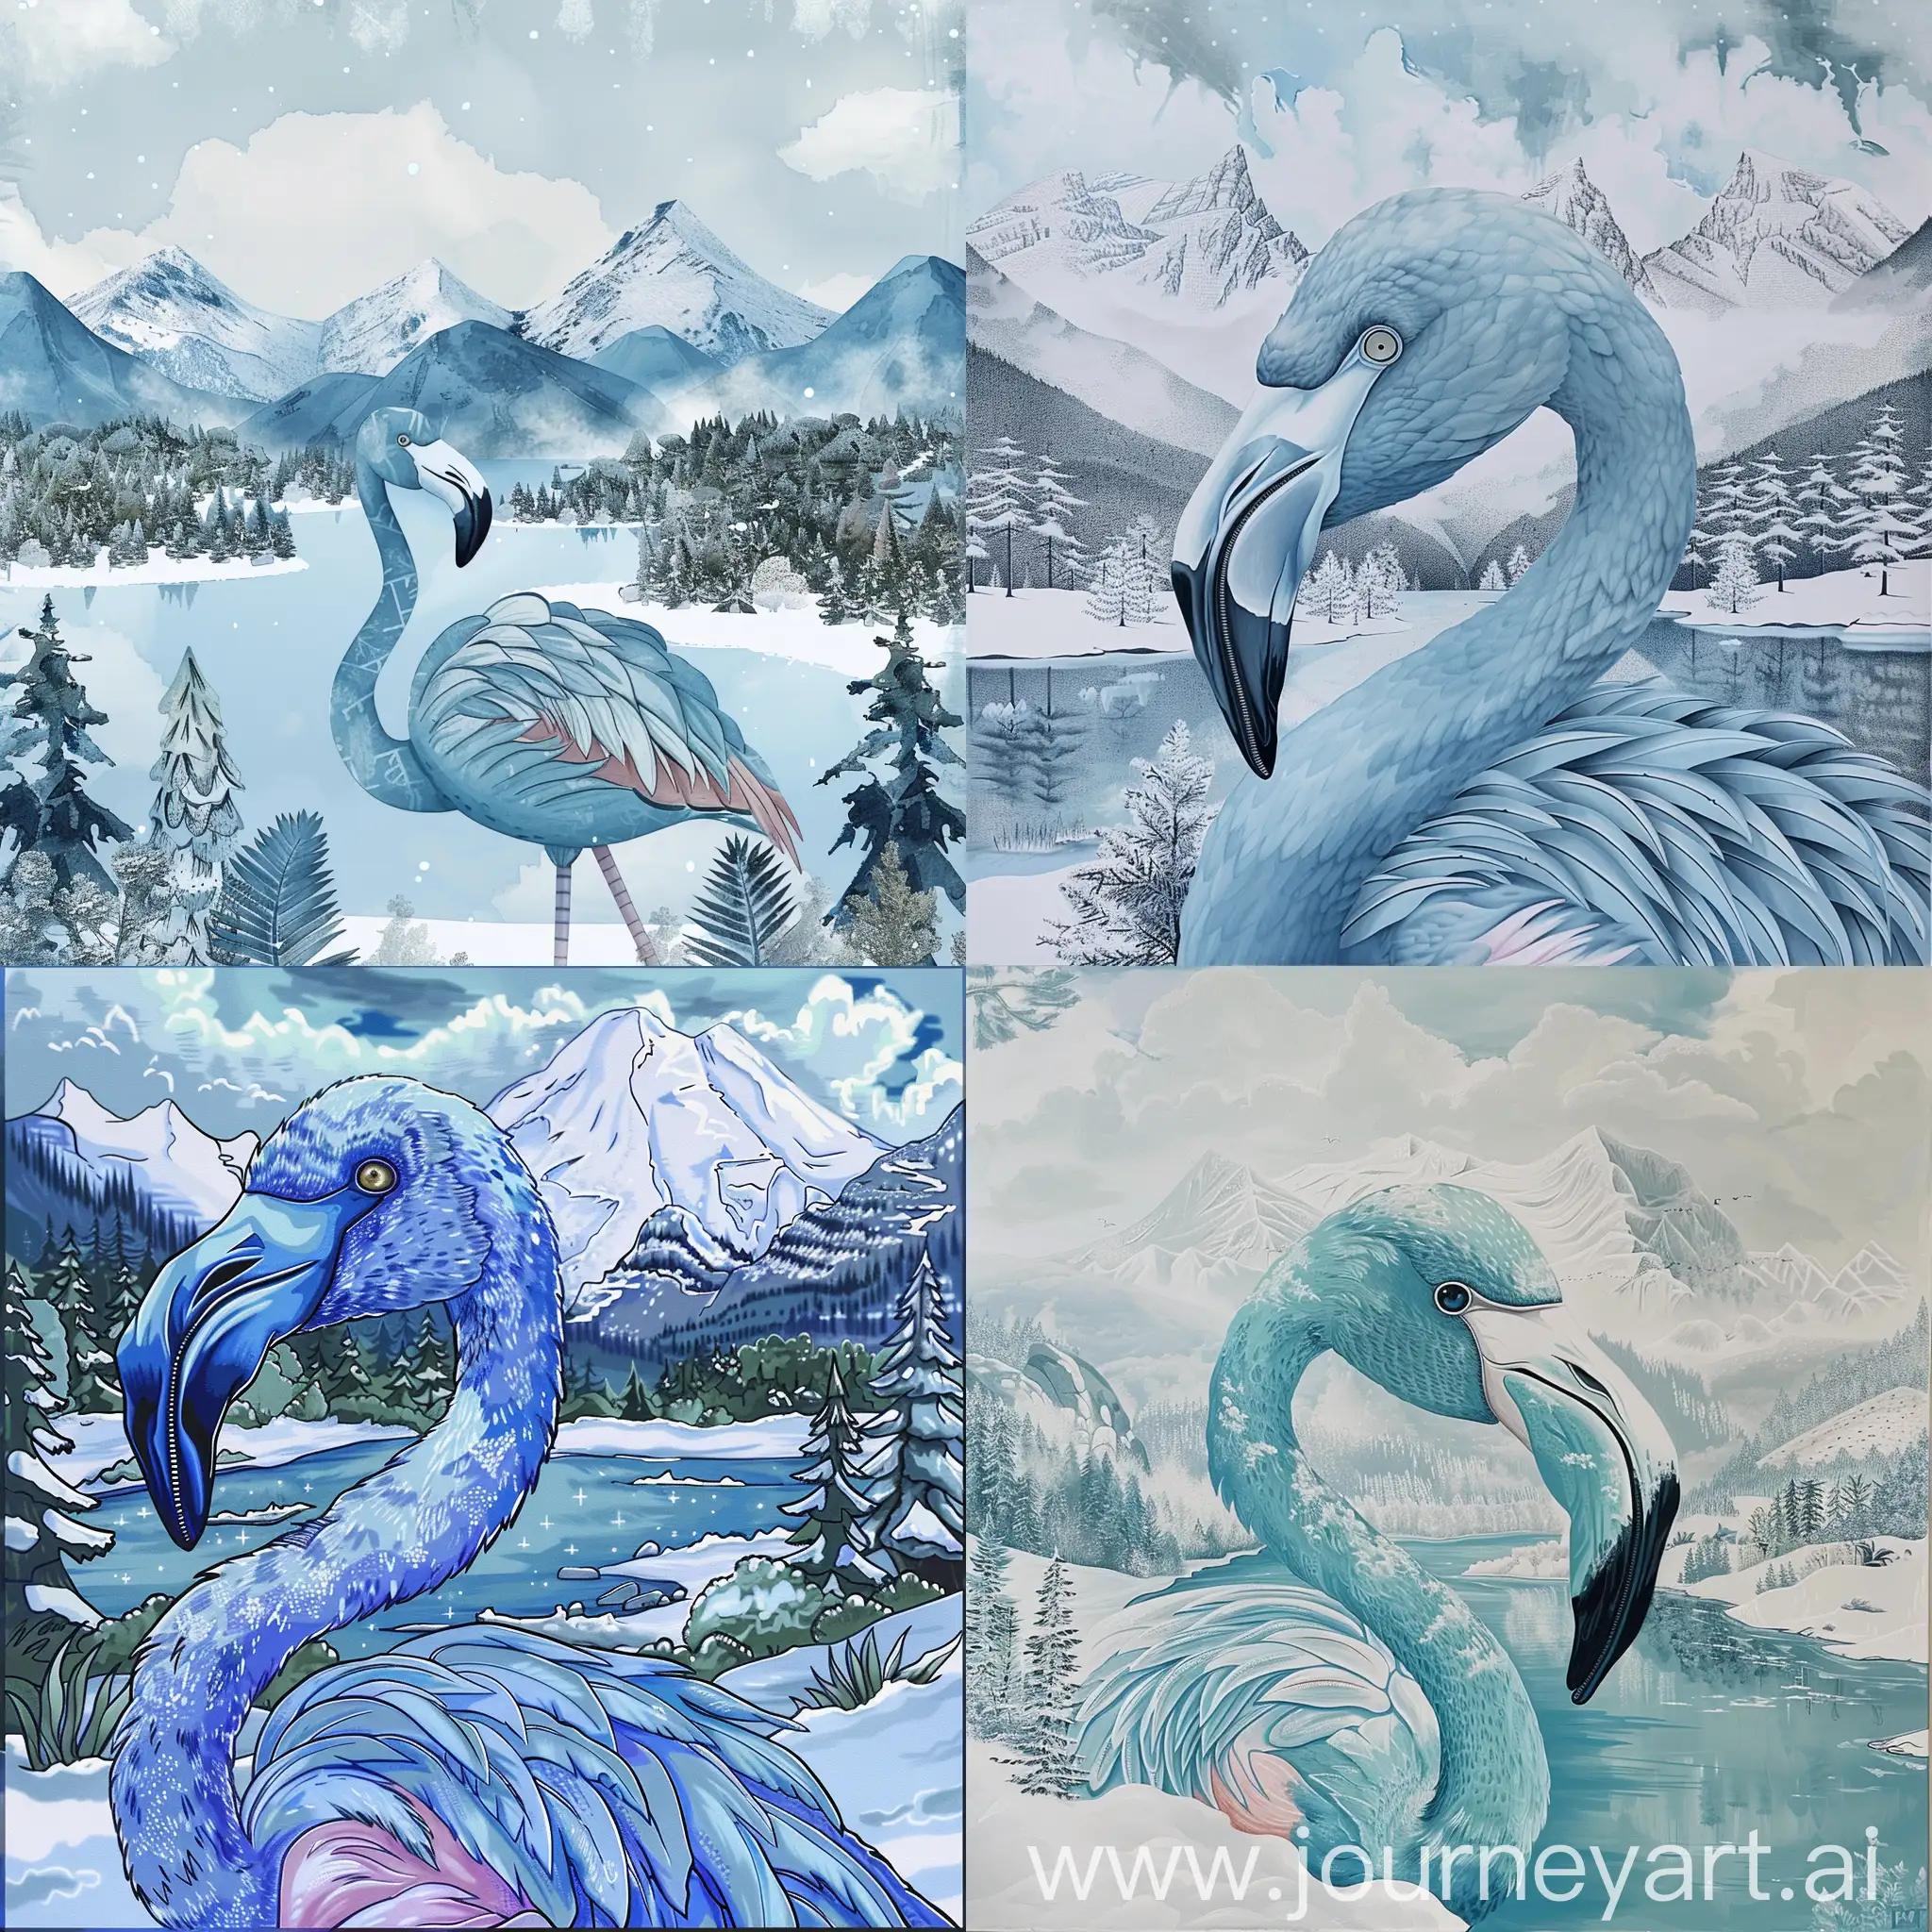 A lightblue flamingo with a darkblue nose in a winterly mountainlake landscape 